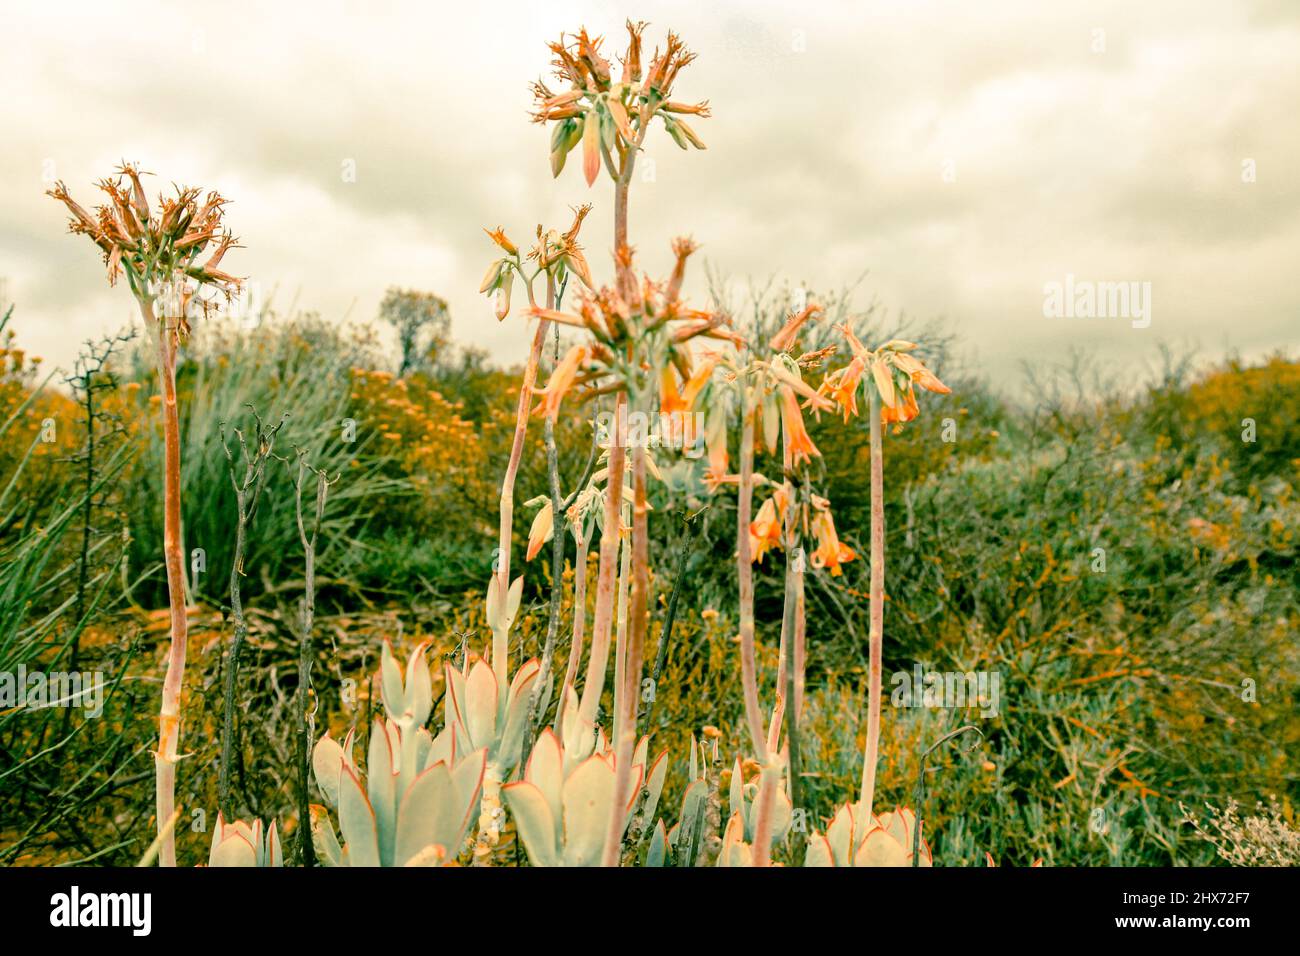 Creative Nature Plants, Aloes, Succulents & Quiver Trees. South Africa's National Botanical Gardens. Backgrounds, Abstract & Interior Design Stock Photo